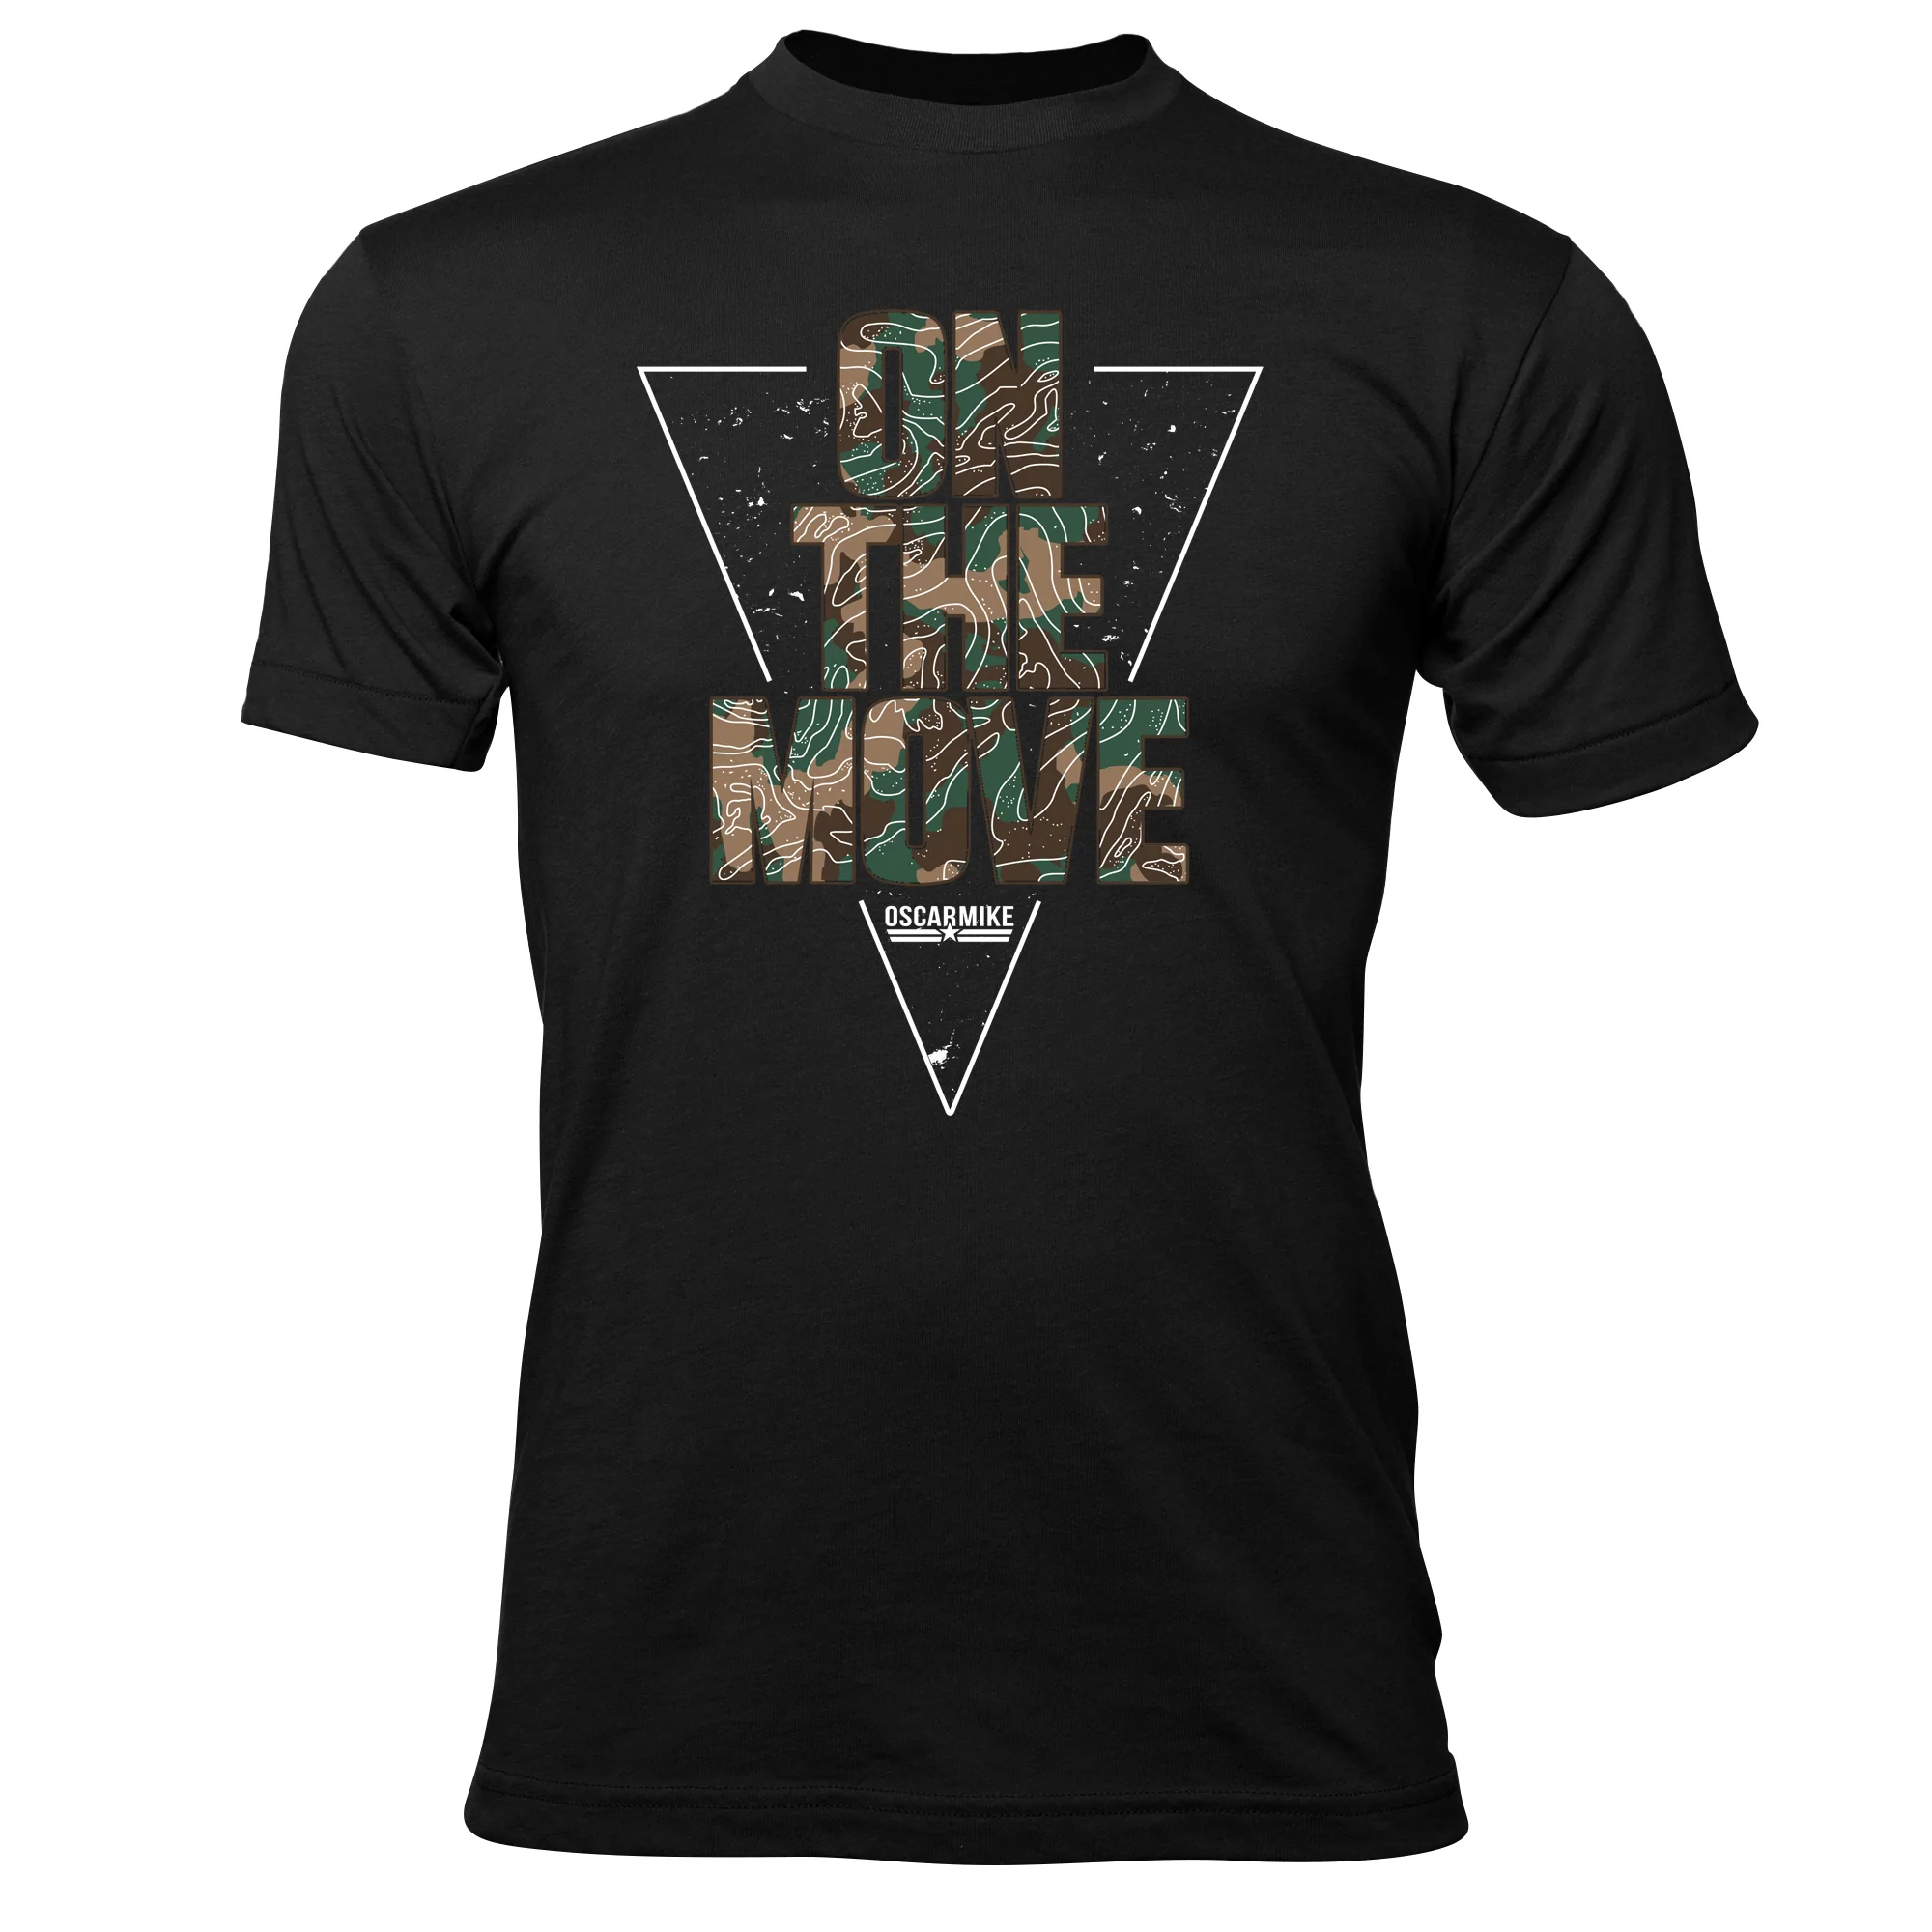 Oscar Mike Men's On The Move Tee posted by ProdOrigin USA in Men's Apparel